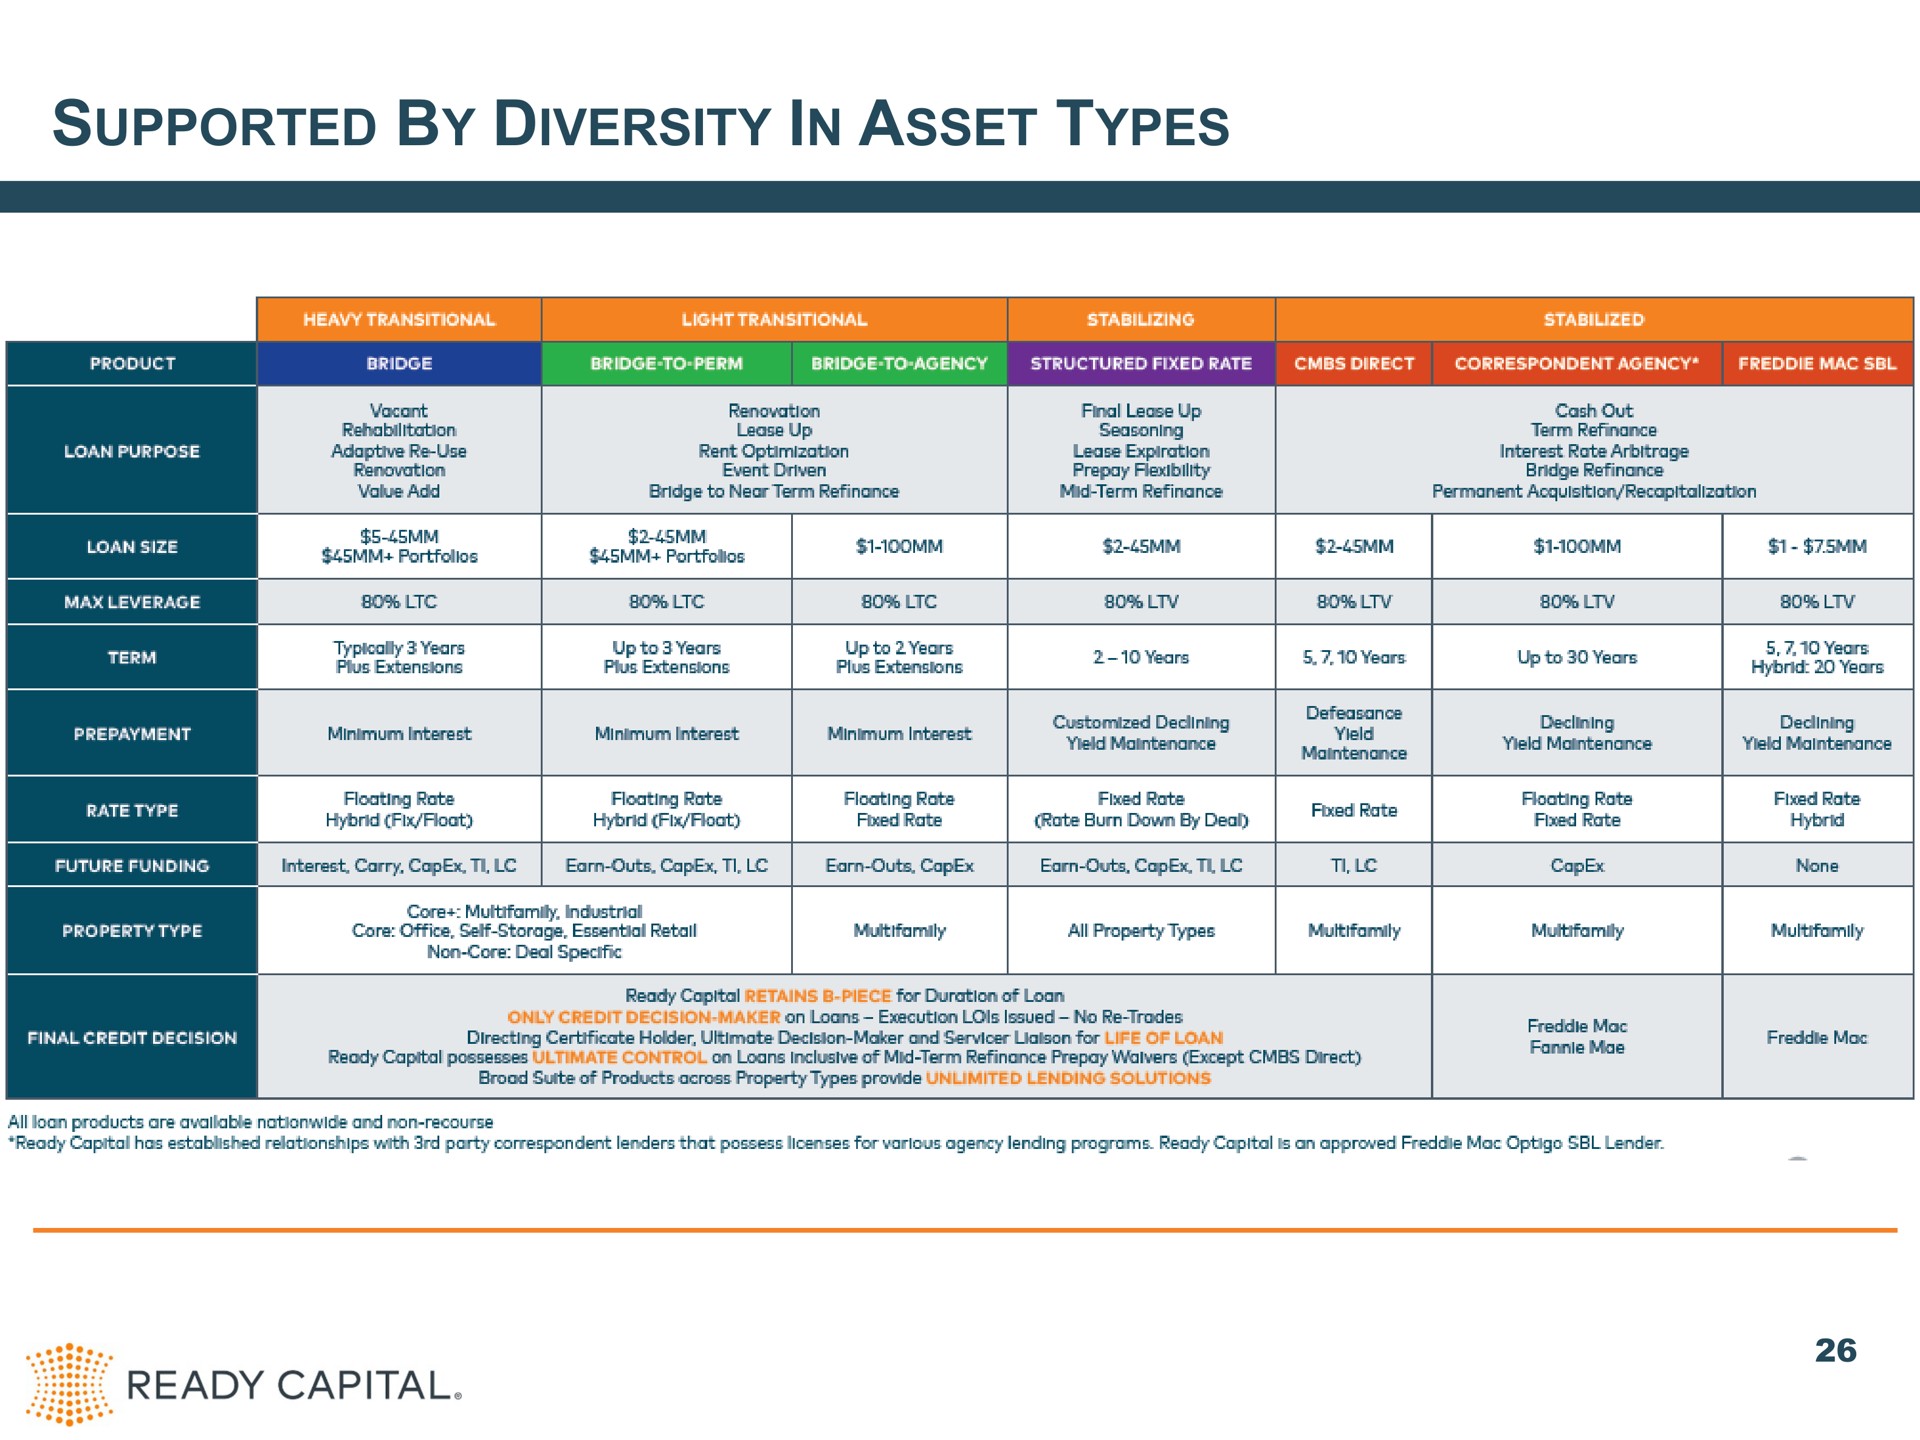 supported by diversity in asset types weaves sig ready capital | Ready Capital